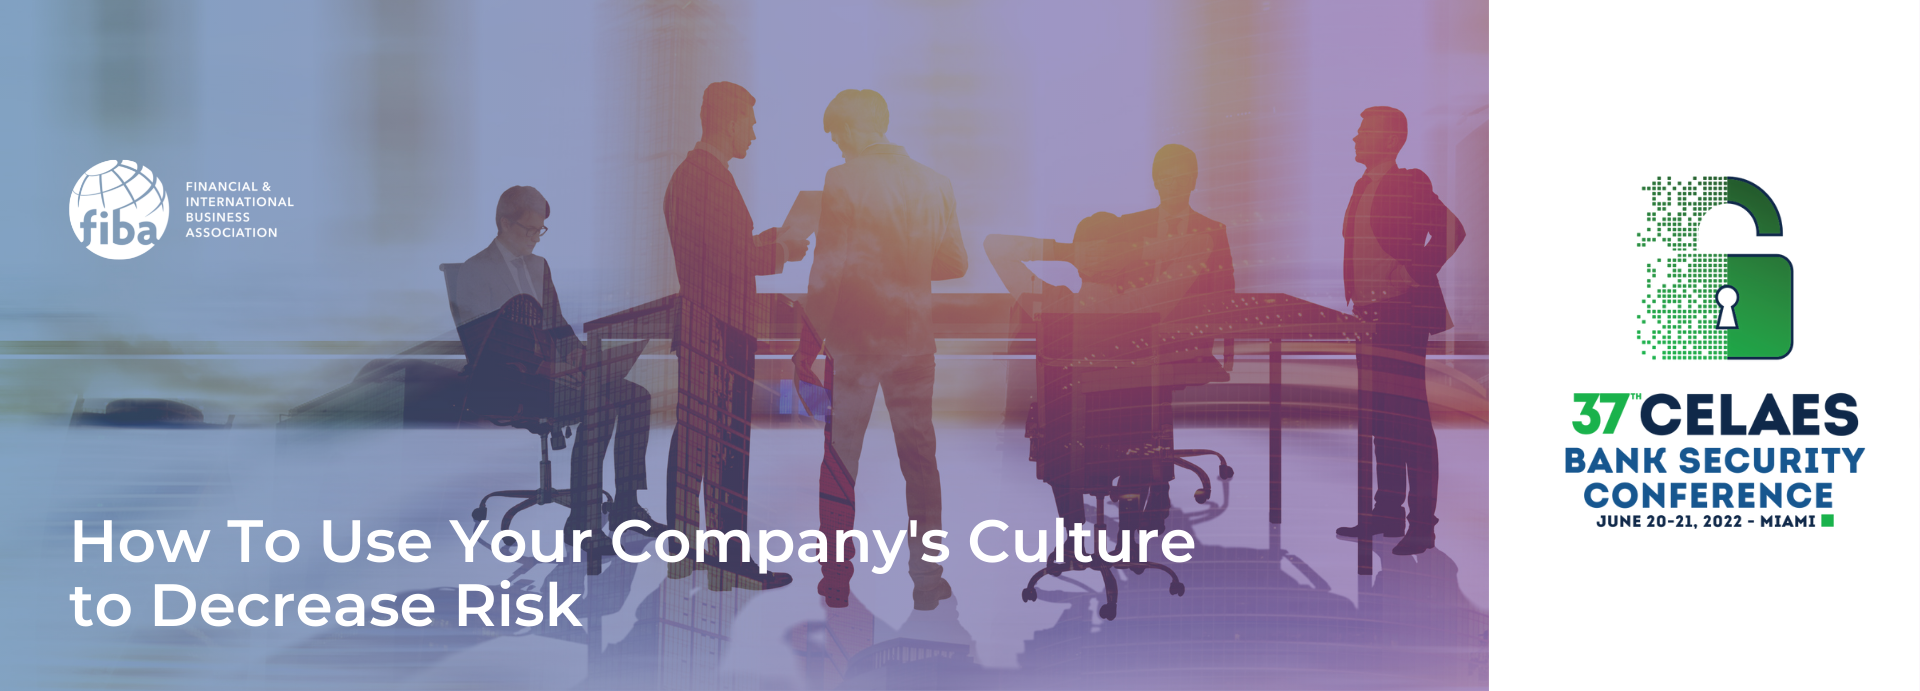 How To Use Your Company’s Culture to Decrease Risk